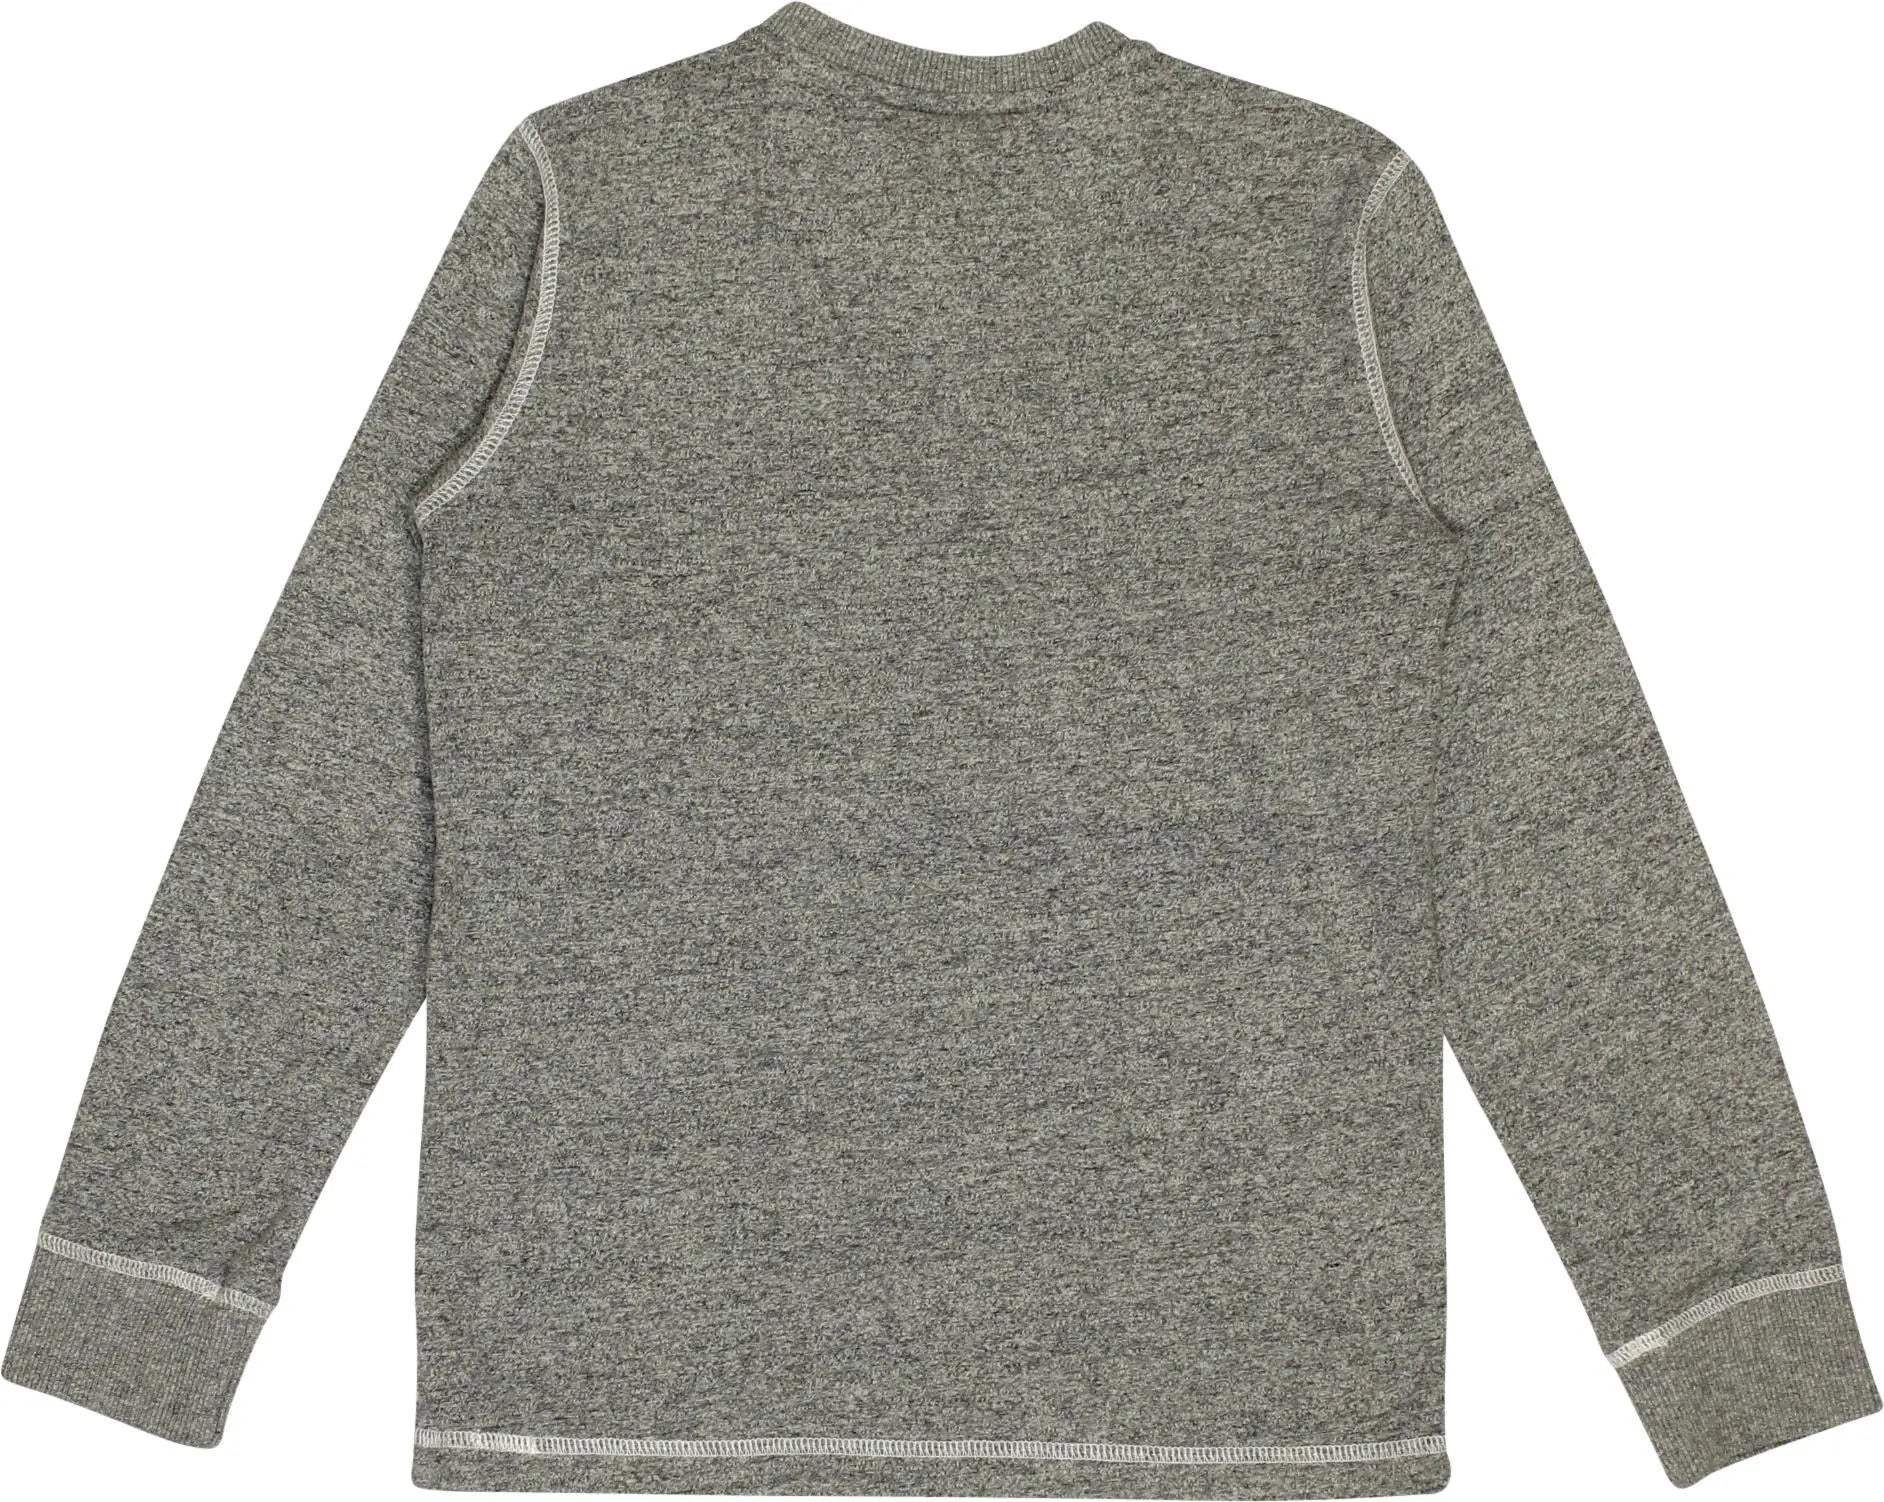 C&A - Grey Long Sleeve T-shirt- ThriftTale.com - Vintage and second handclothing